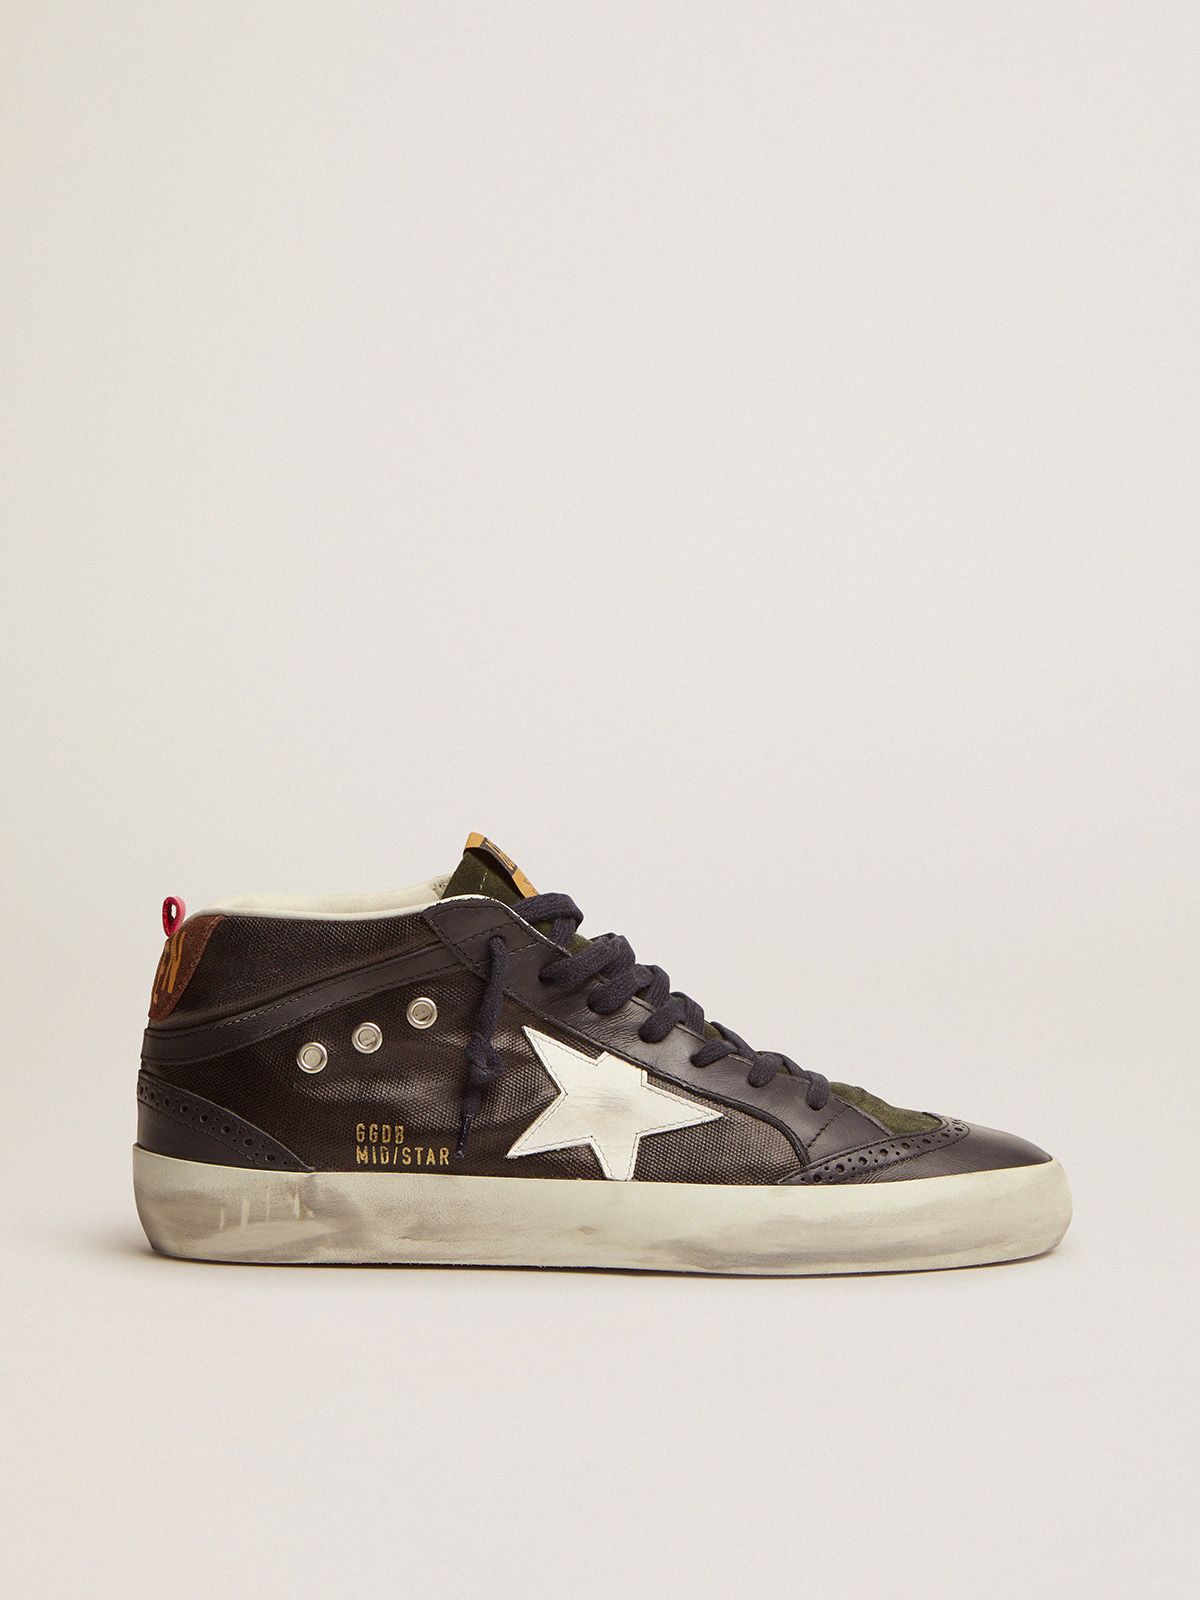 Mid Star sneakers in dark blue canvas with white leather star